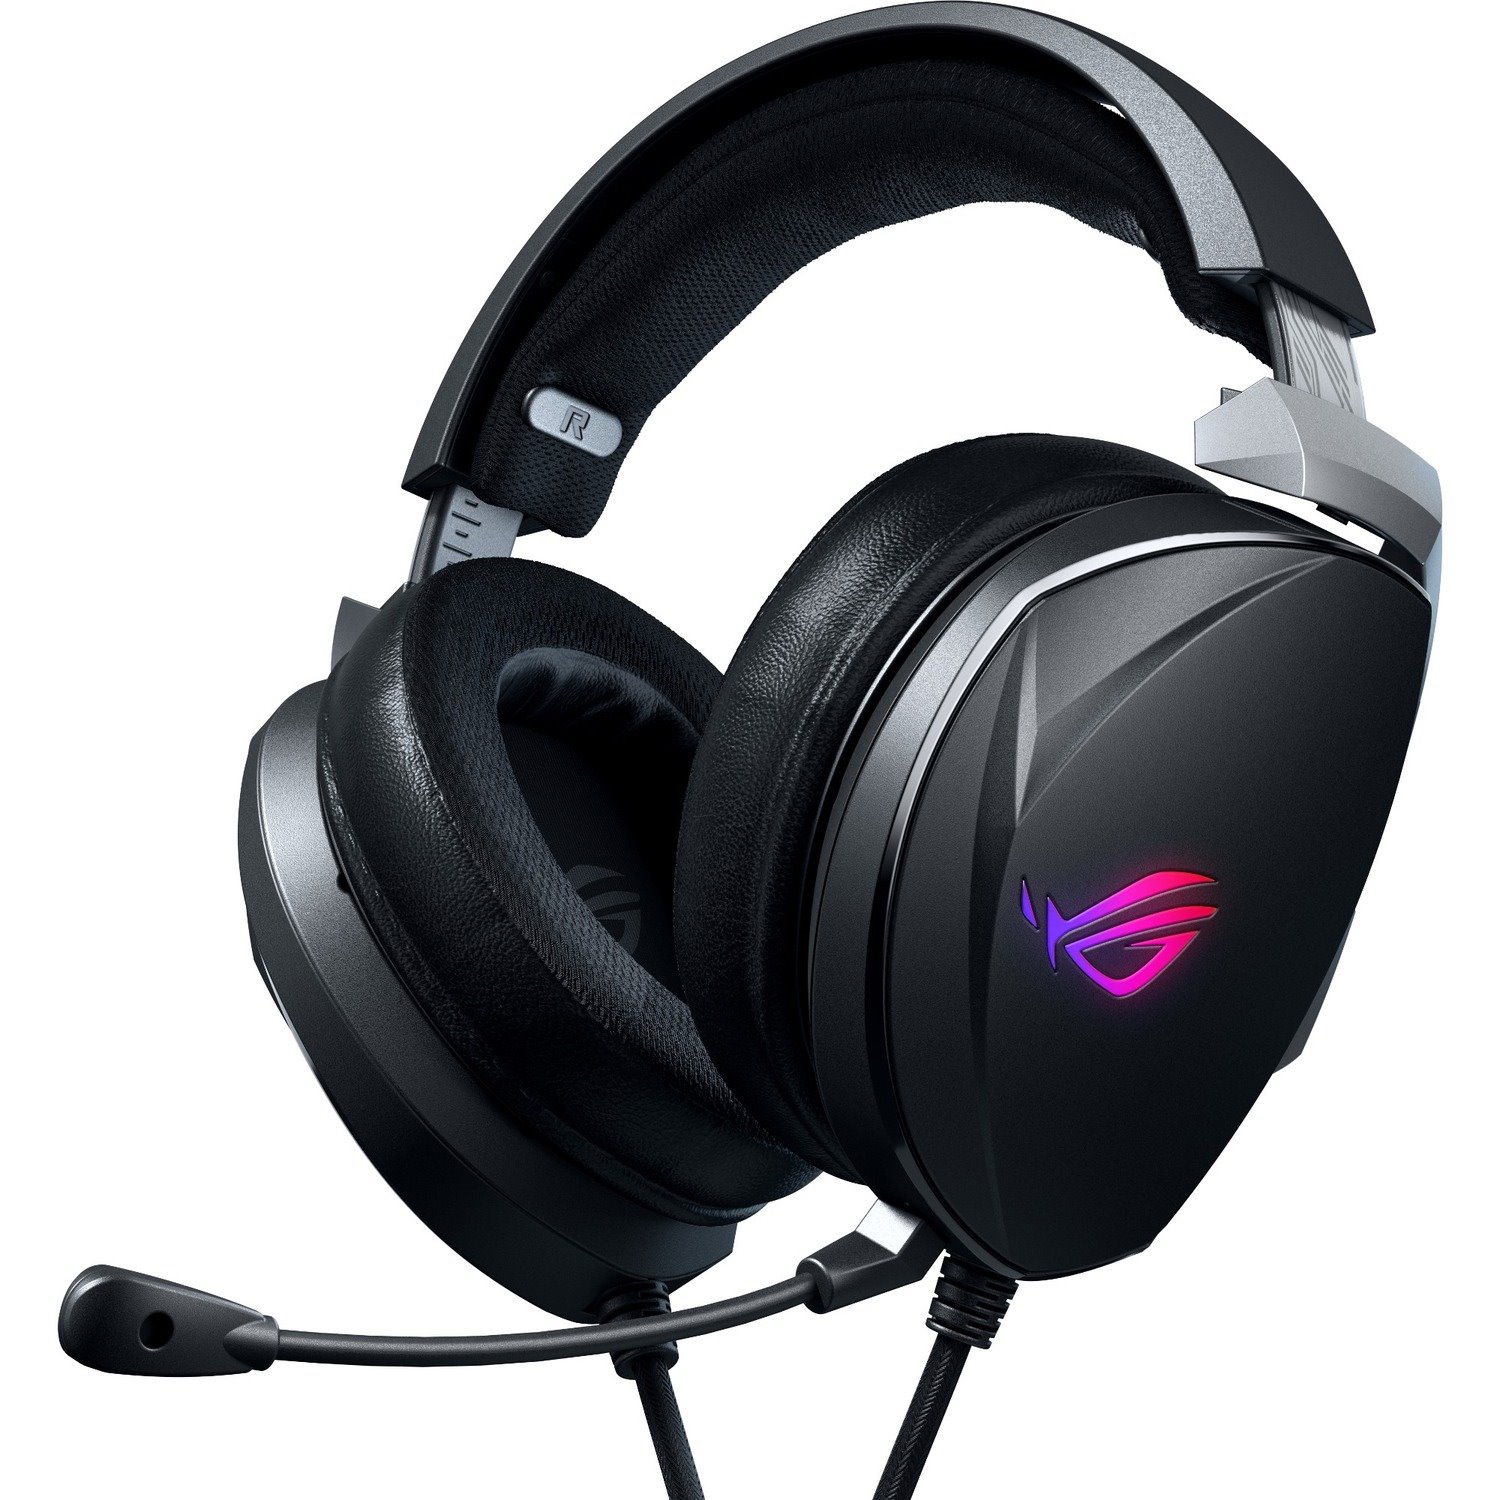 Asus ROG Theta 7.1 Wired Over-the-head Stereo Gaming Headset